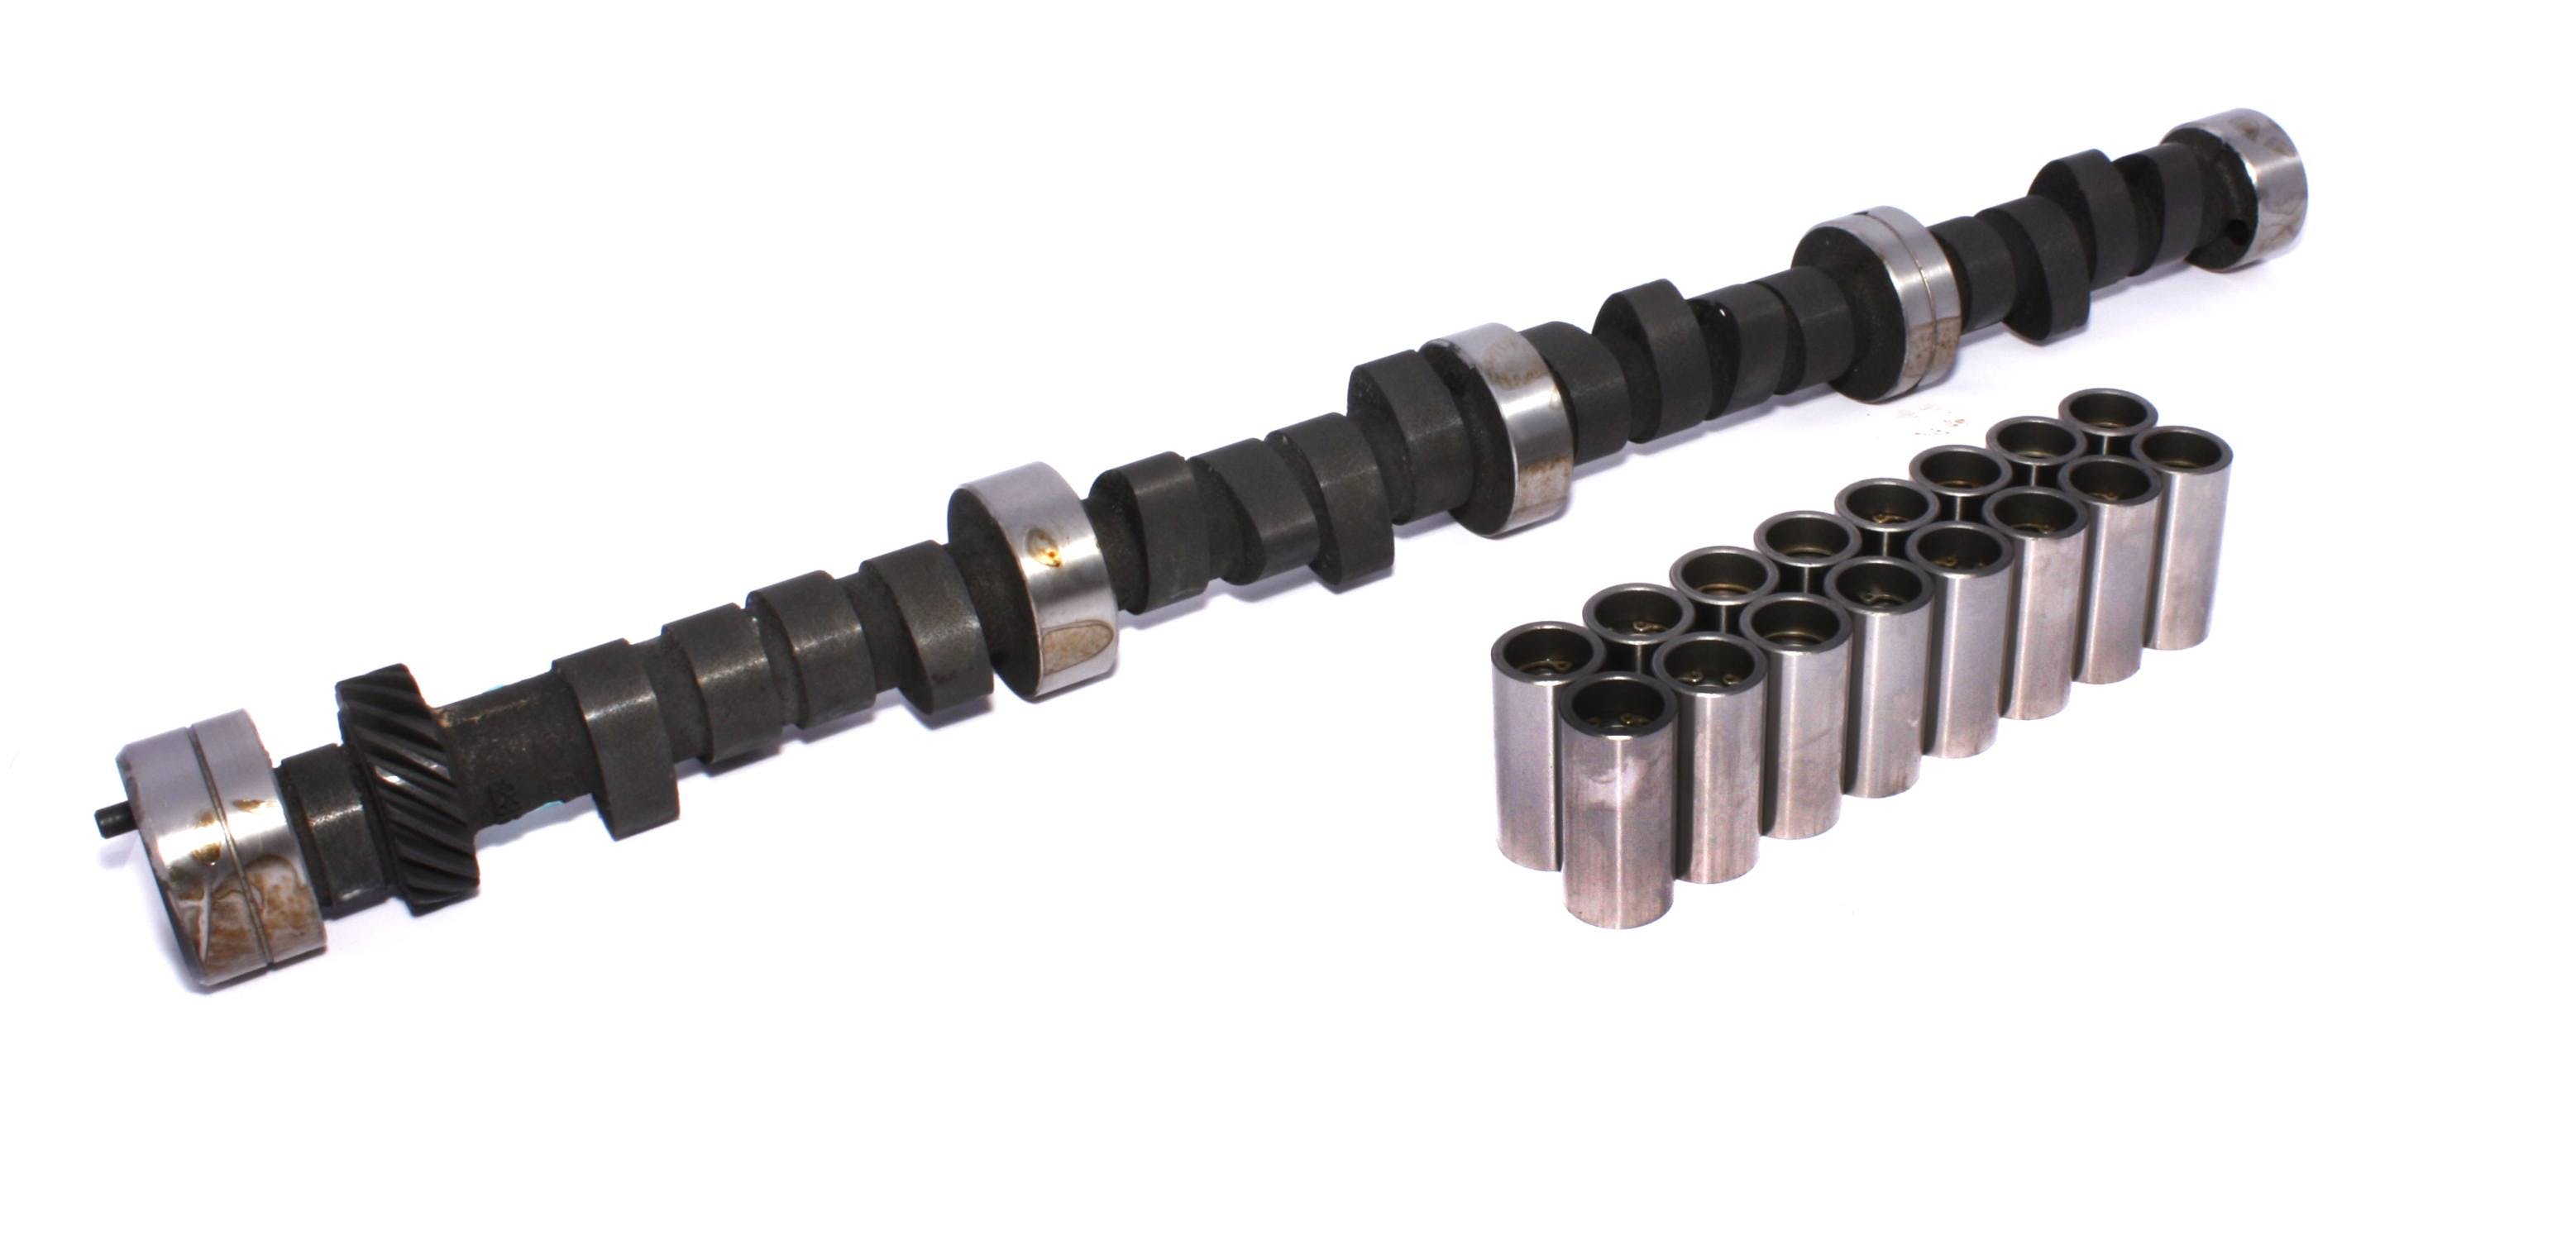 Competition Cams CL24-308-4 Drag Race Camshaft/Lifter Kit